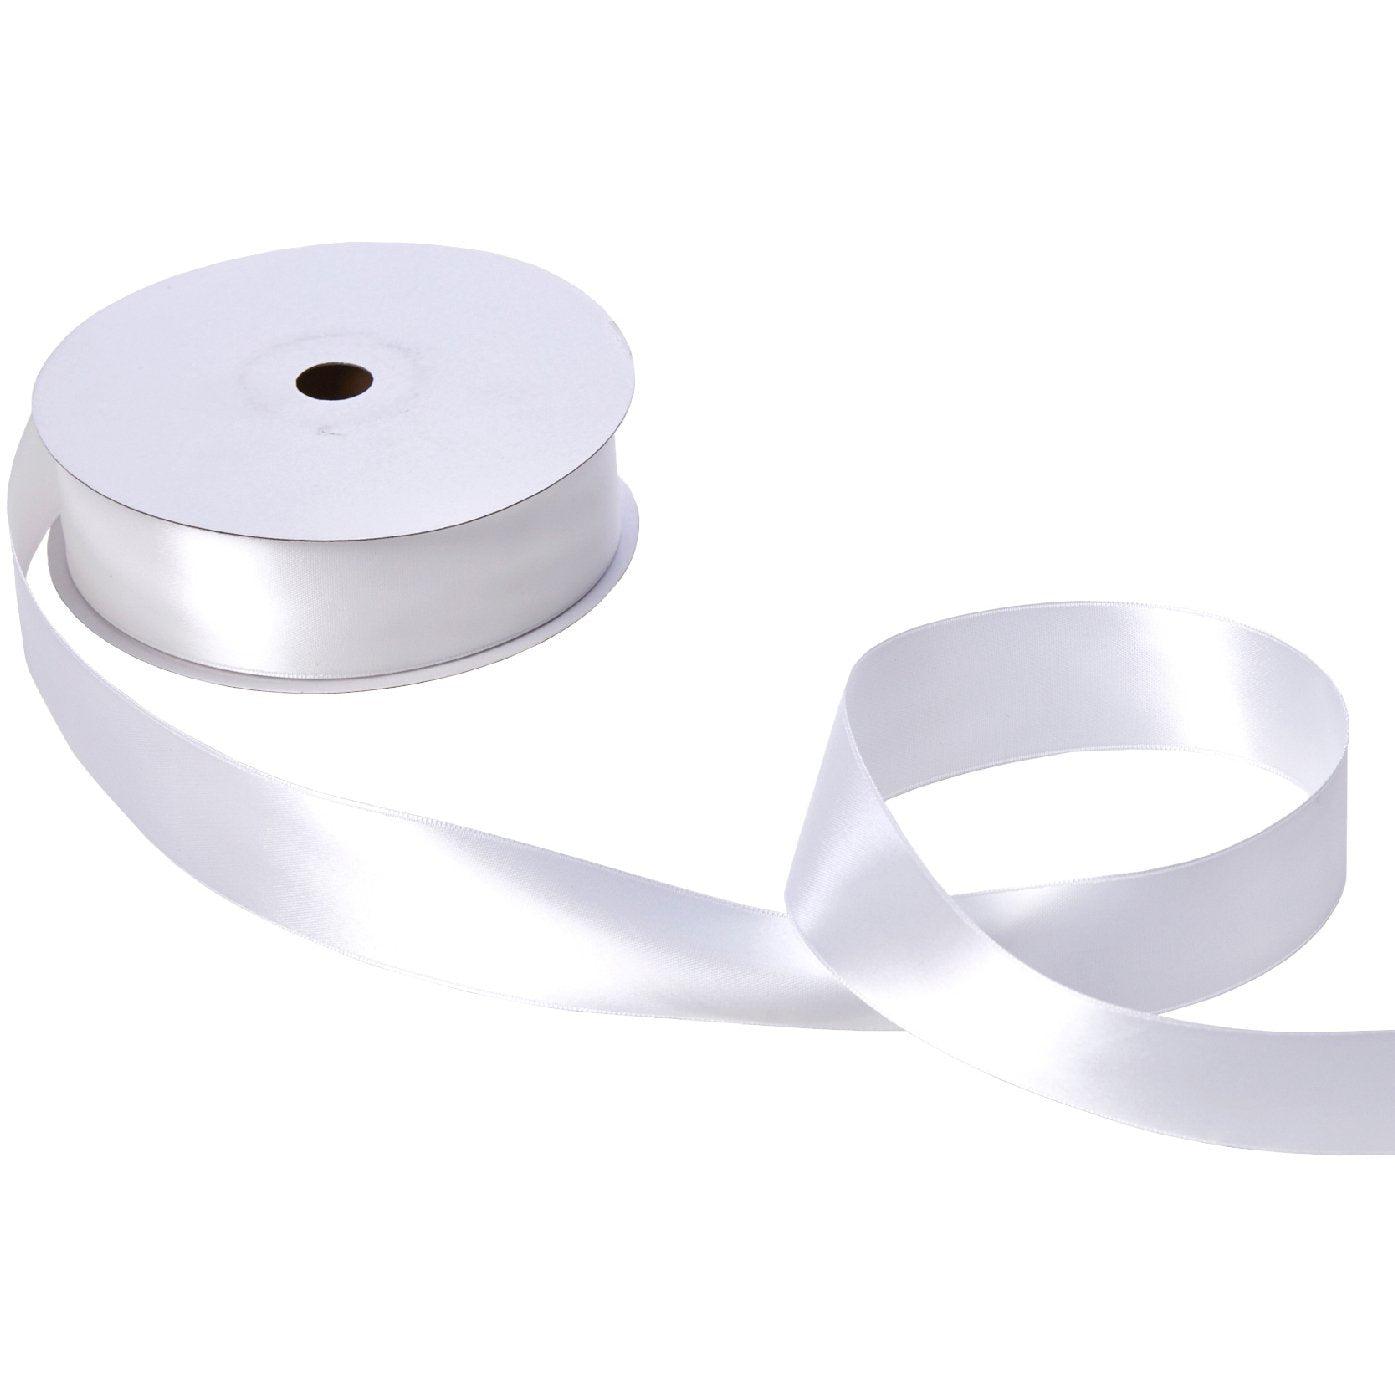 Jillson & Roberts Double-Faced Satin Ribbon, 1 1/2" Wide x 50 Yards, White by Present Paper - Vysn